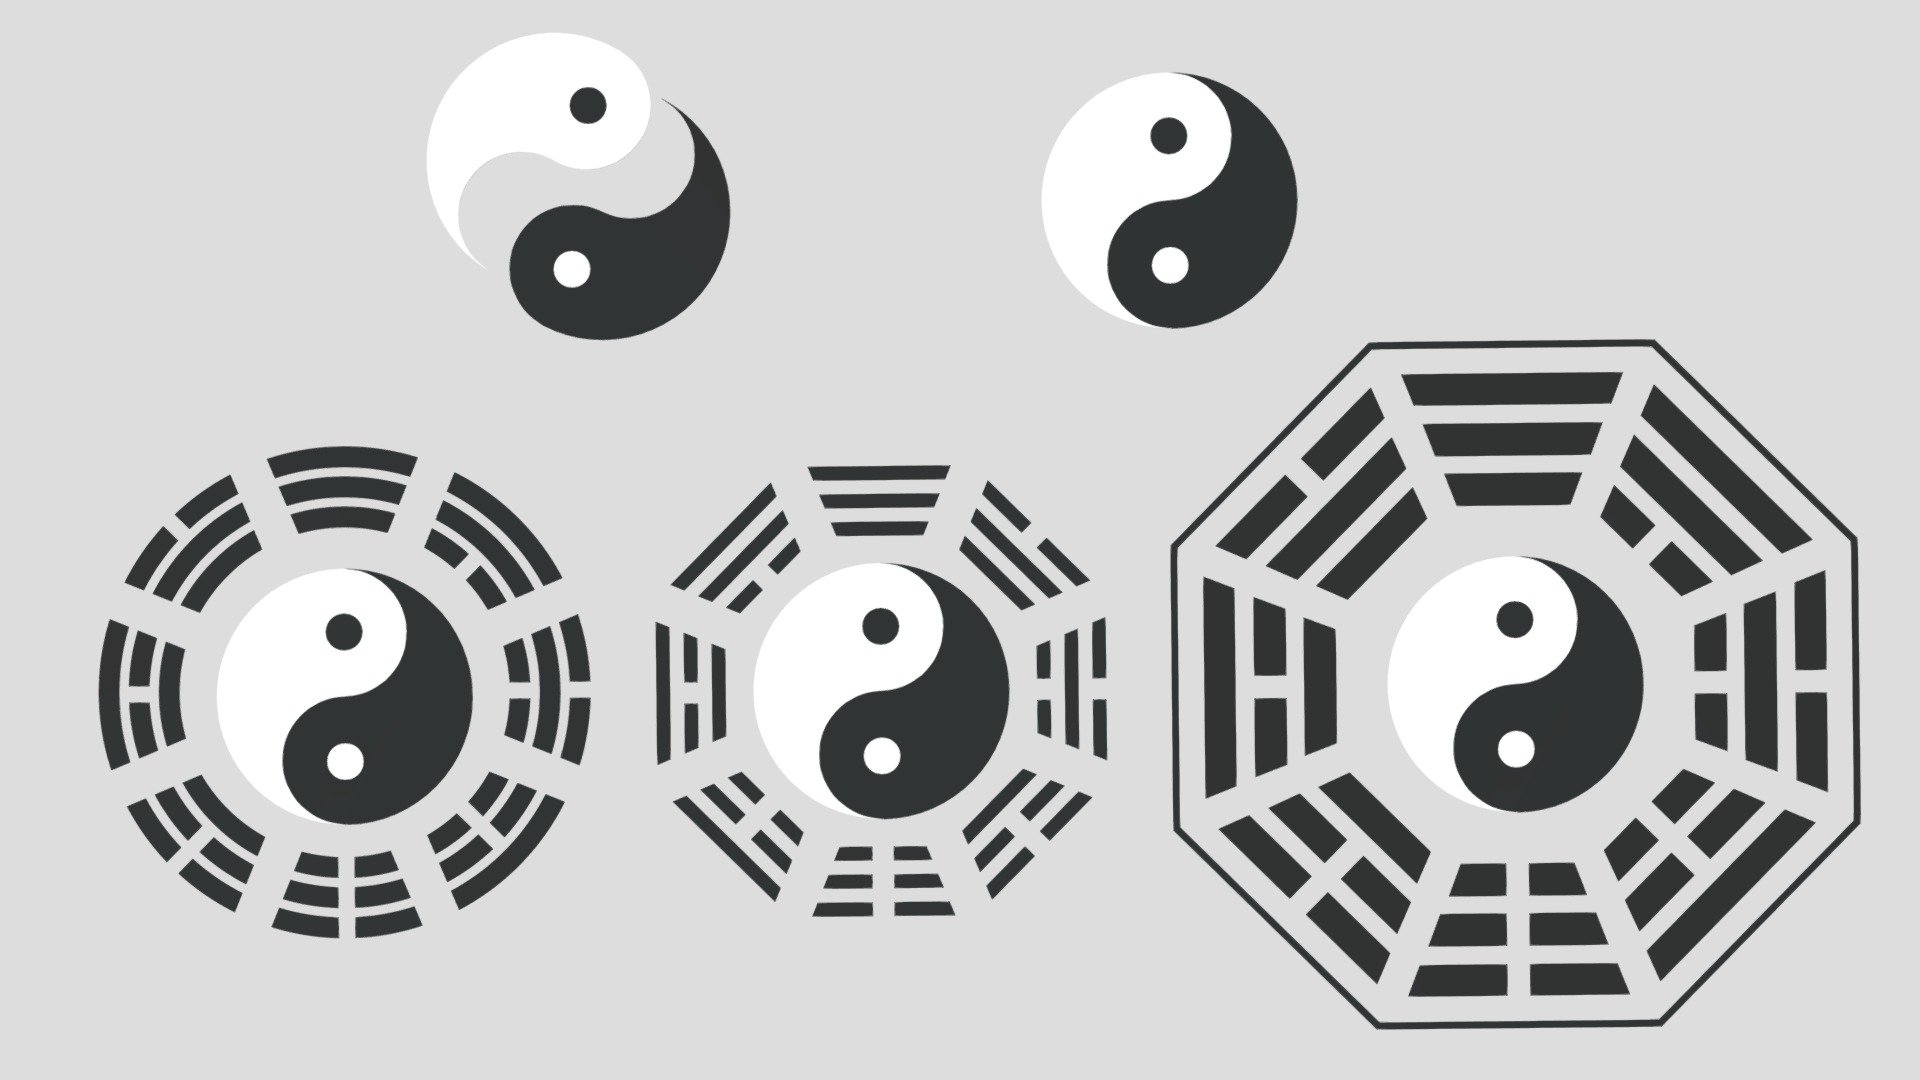 -Tai Chi Yin Yang Bagua Tao.

-Vert: 7,189 poly: 4,764.

-This product contains 42 objects.

-This product was created in Blender 2.8.

-Formats: blend, fbx, obj, c4d, dae, abc, stl, glb,unity.

-We hope you enjoy this model.

-Thank you 3d model